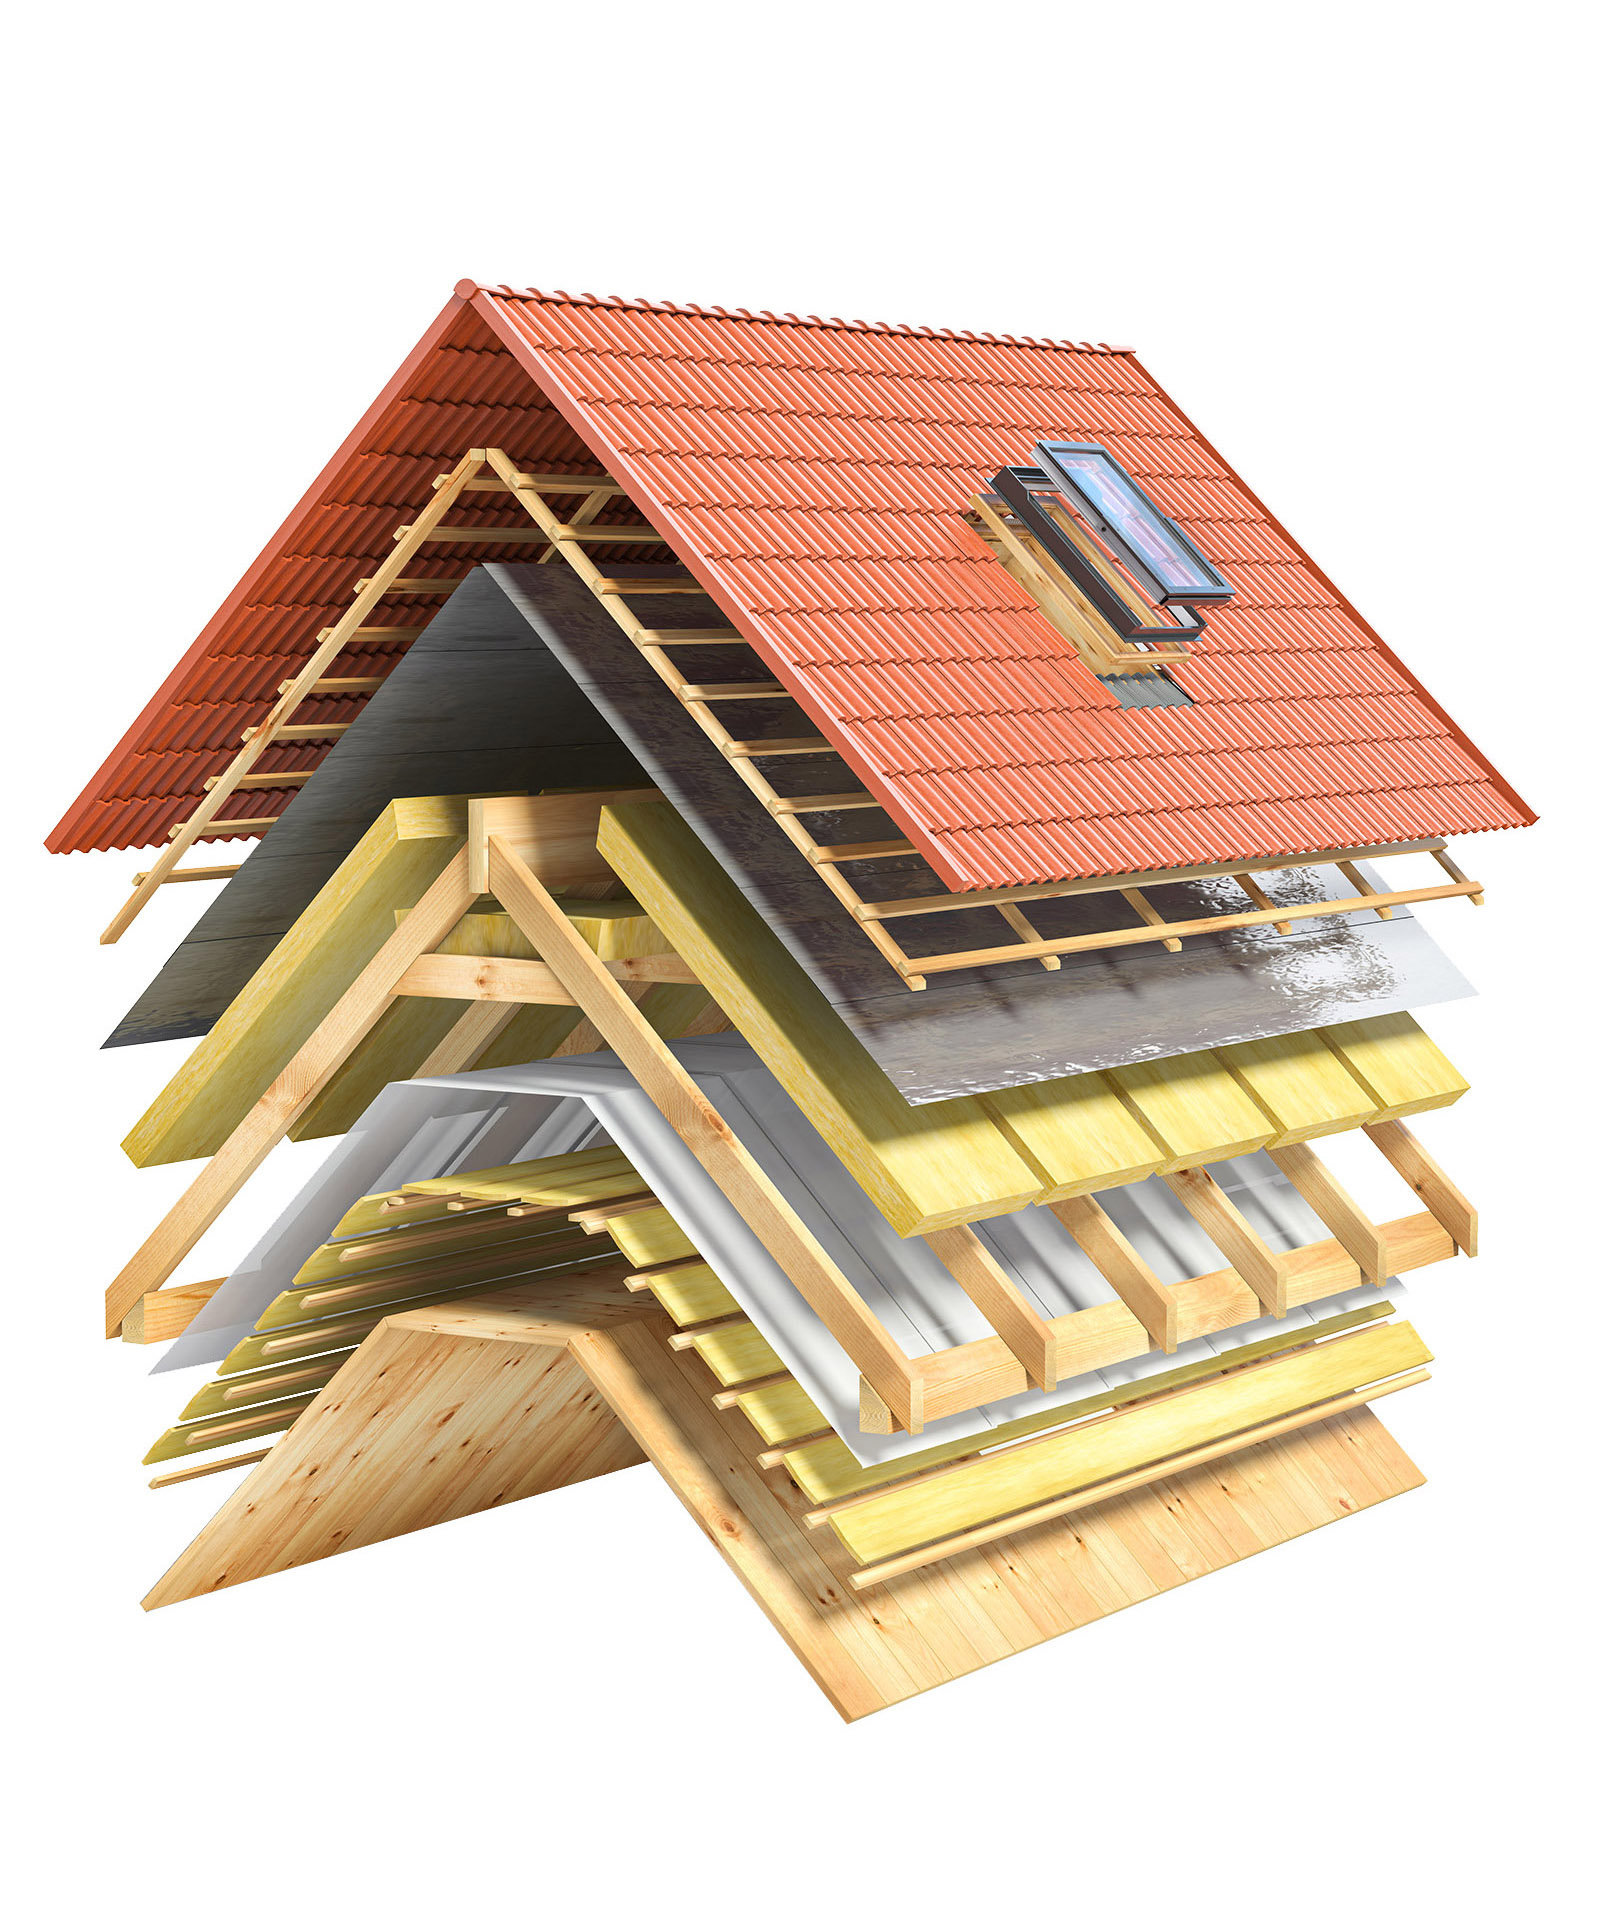 Thermal insulation - roof